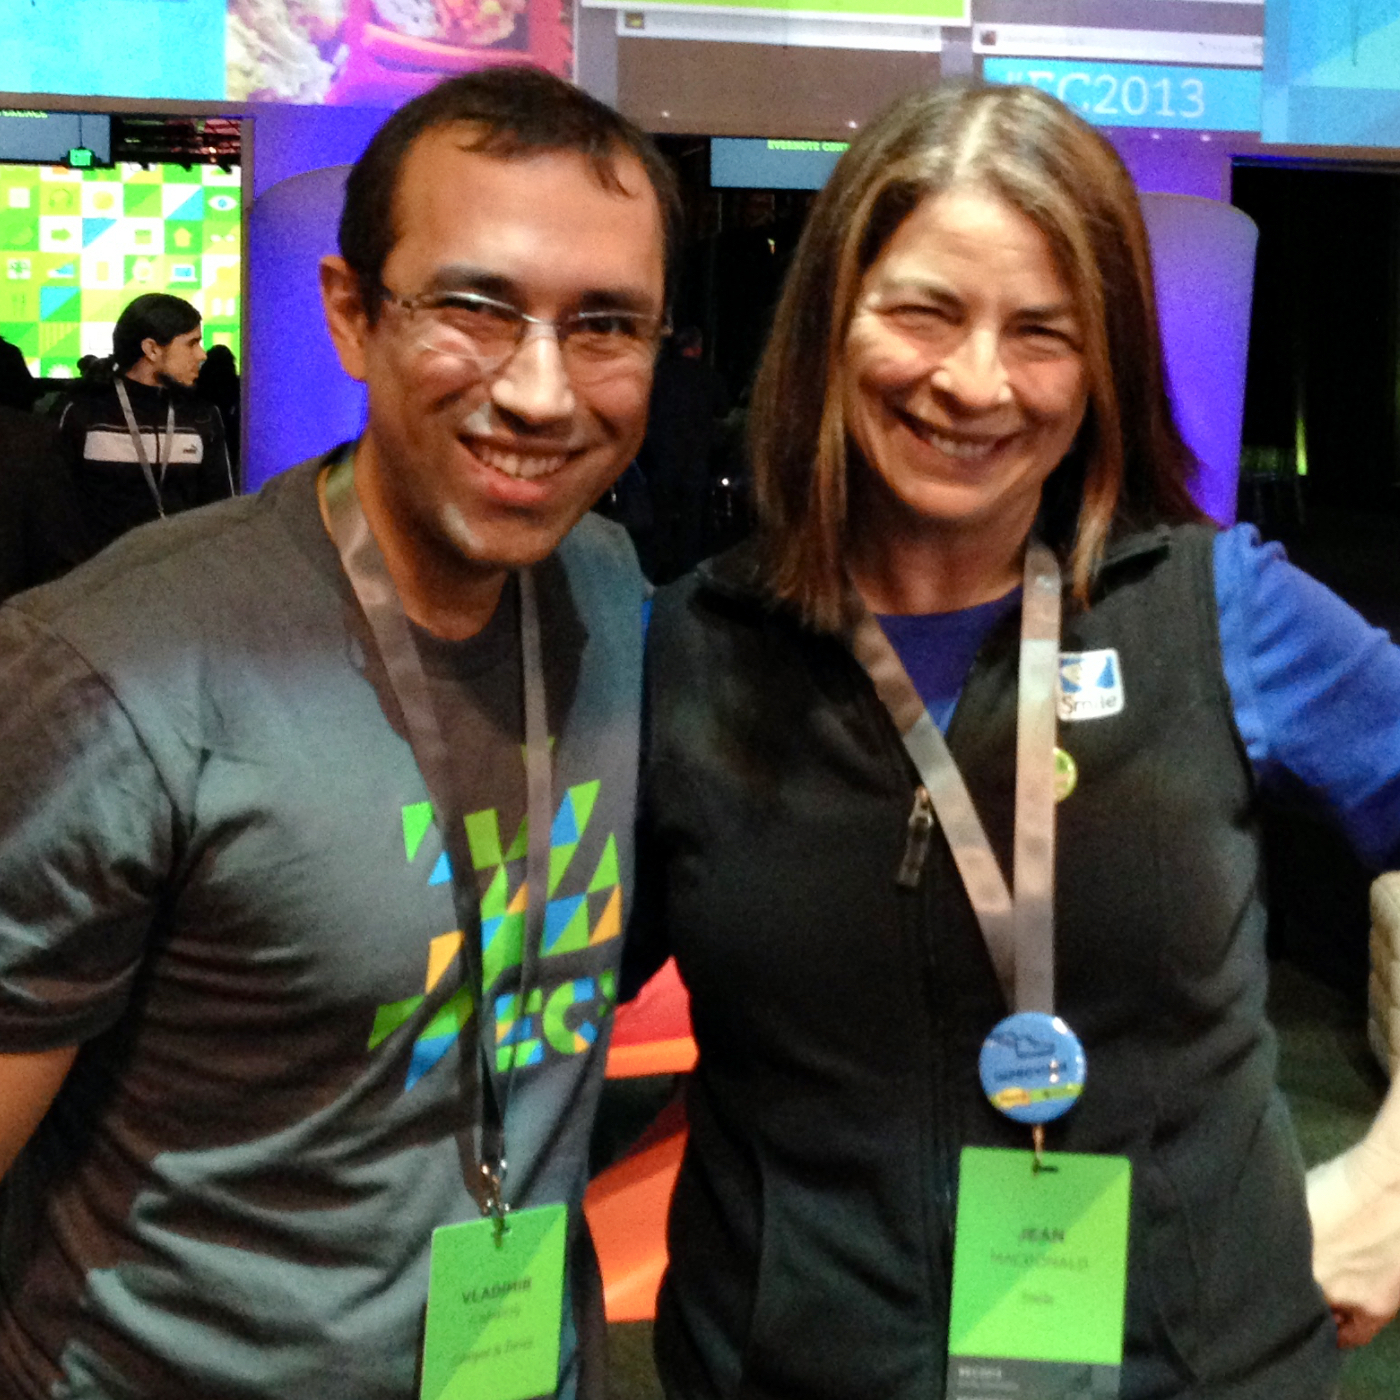 Jean MacDonald and Vladimir Campos at the 2013 Evernote Conference